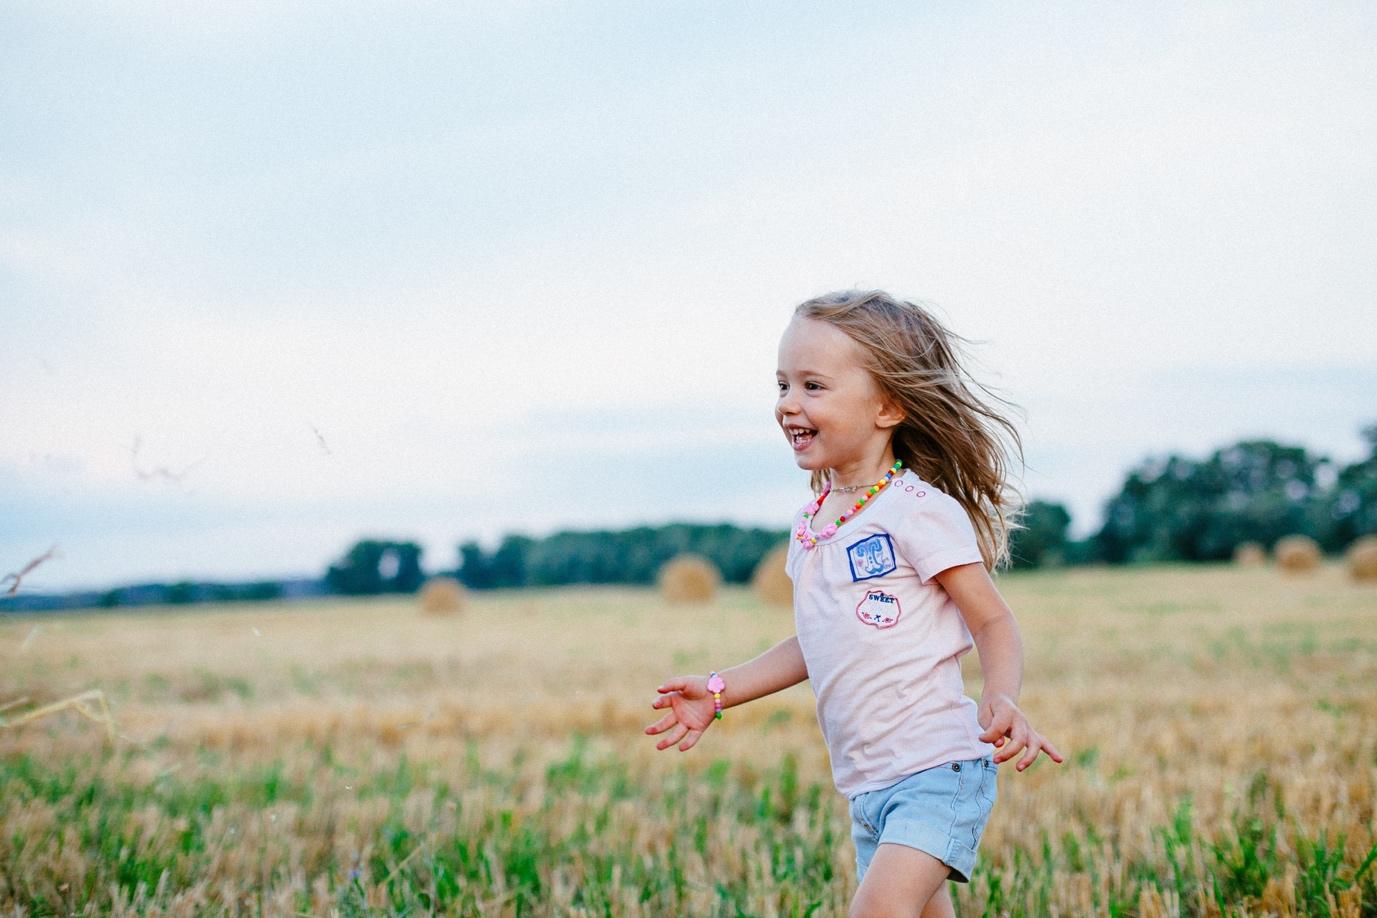 A young child running in a field

Description automatically generated with medium confidence